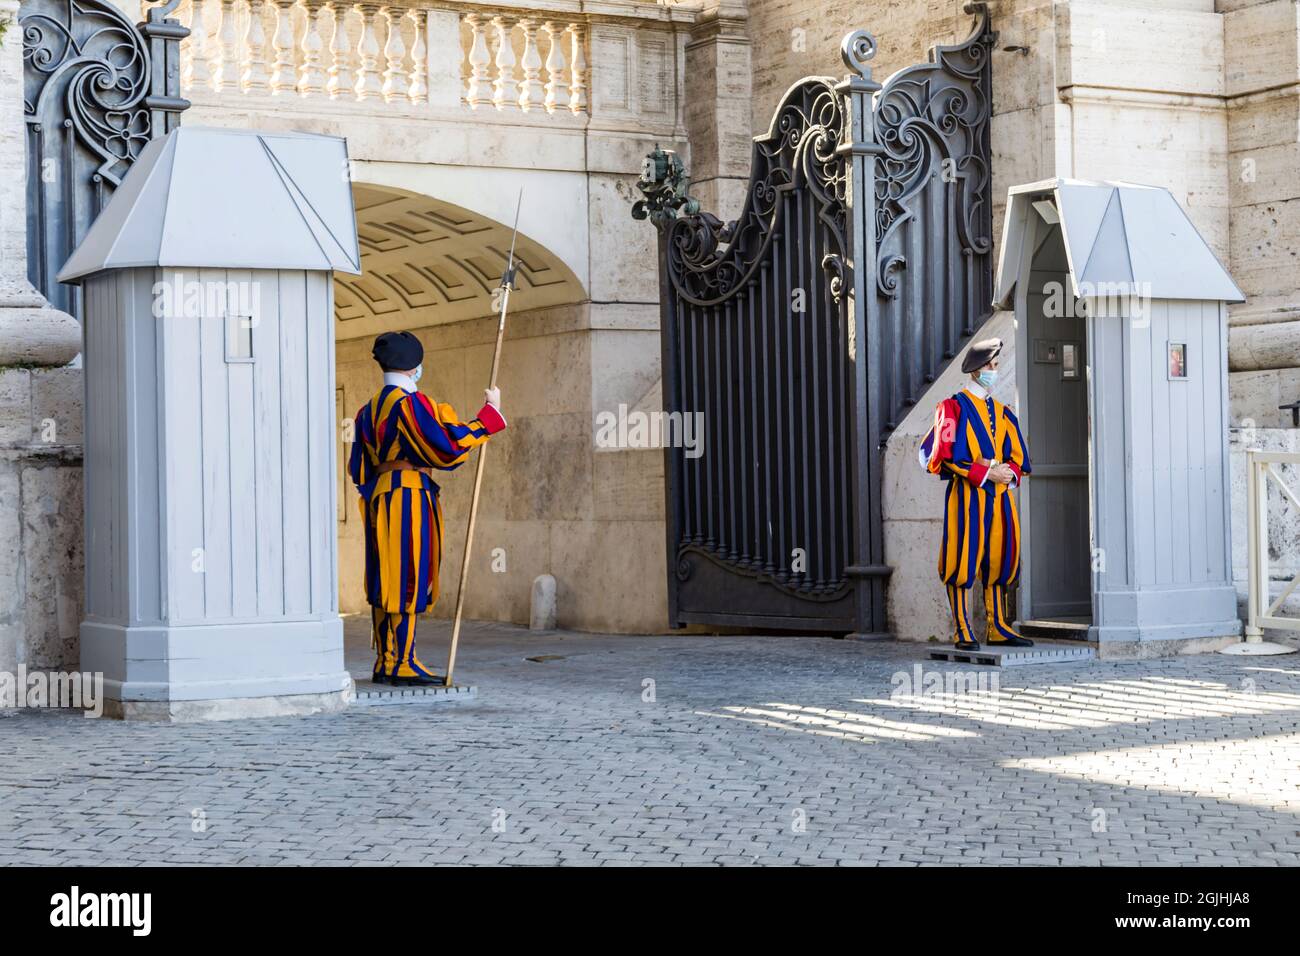 Swiss guards, St Peters Basilica, Rome, Italy Stock Photo